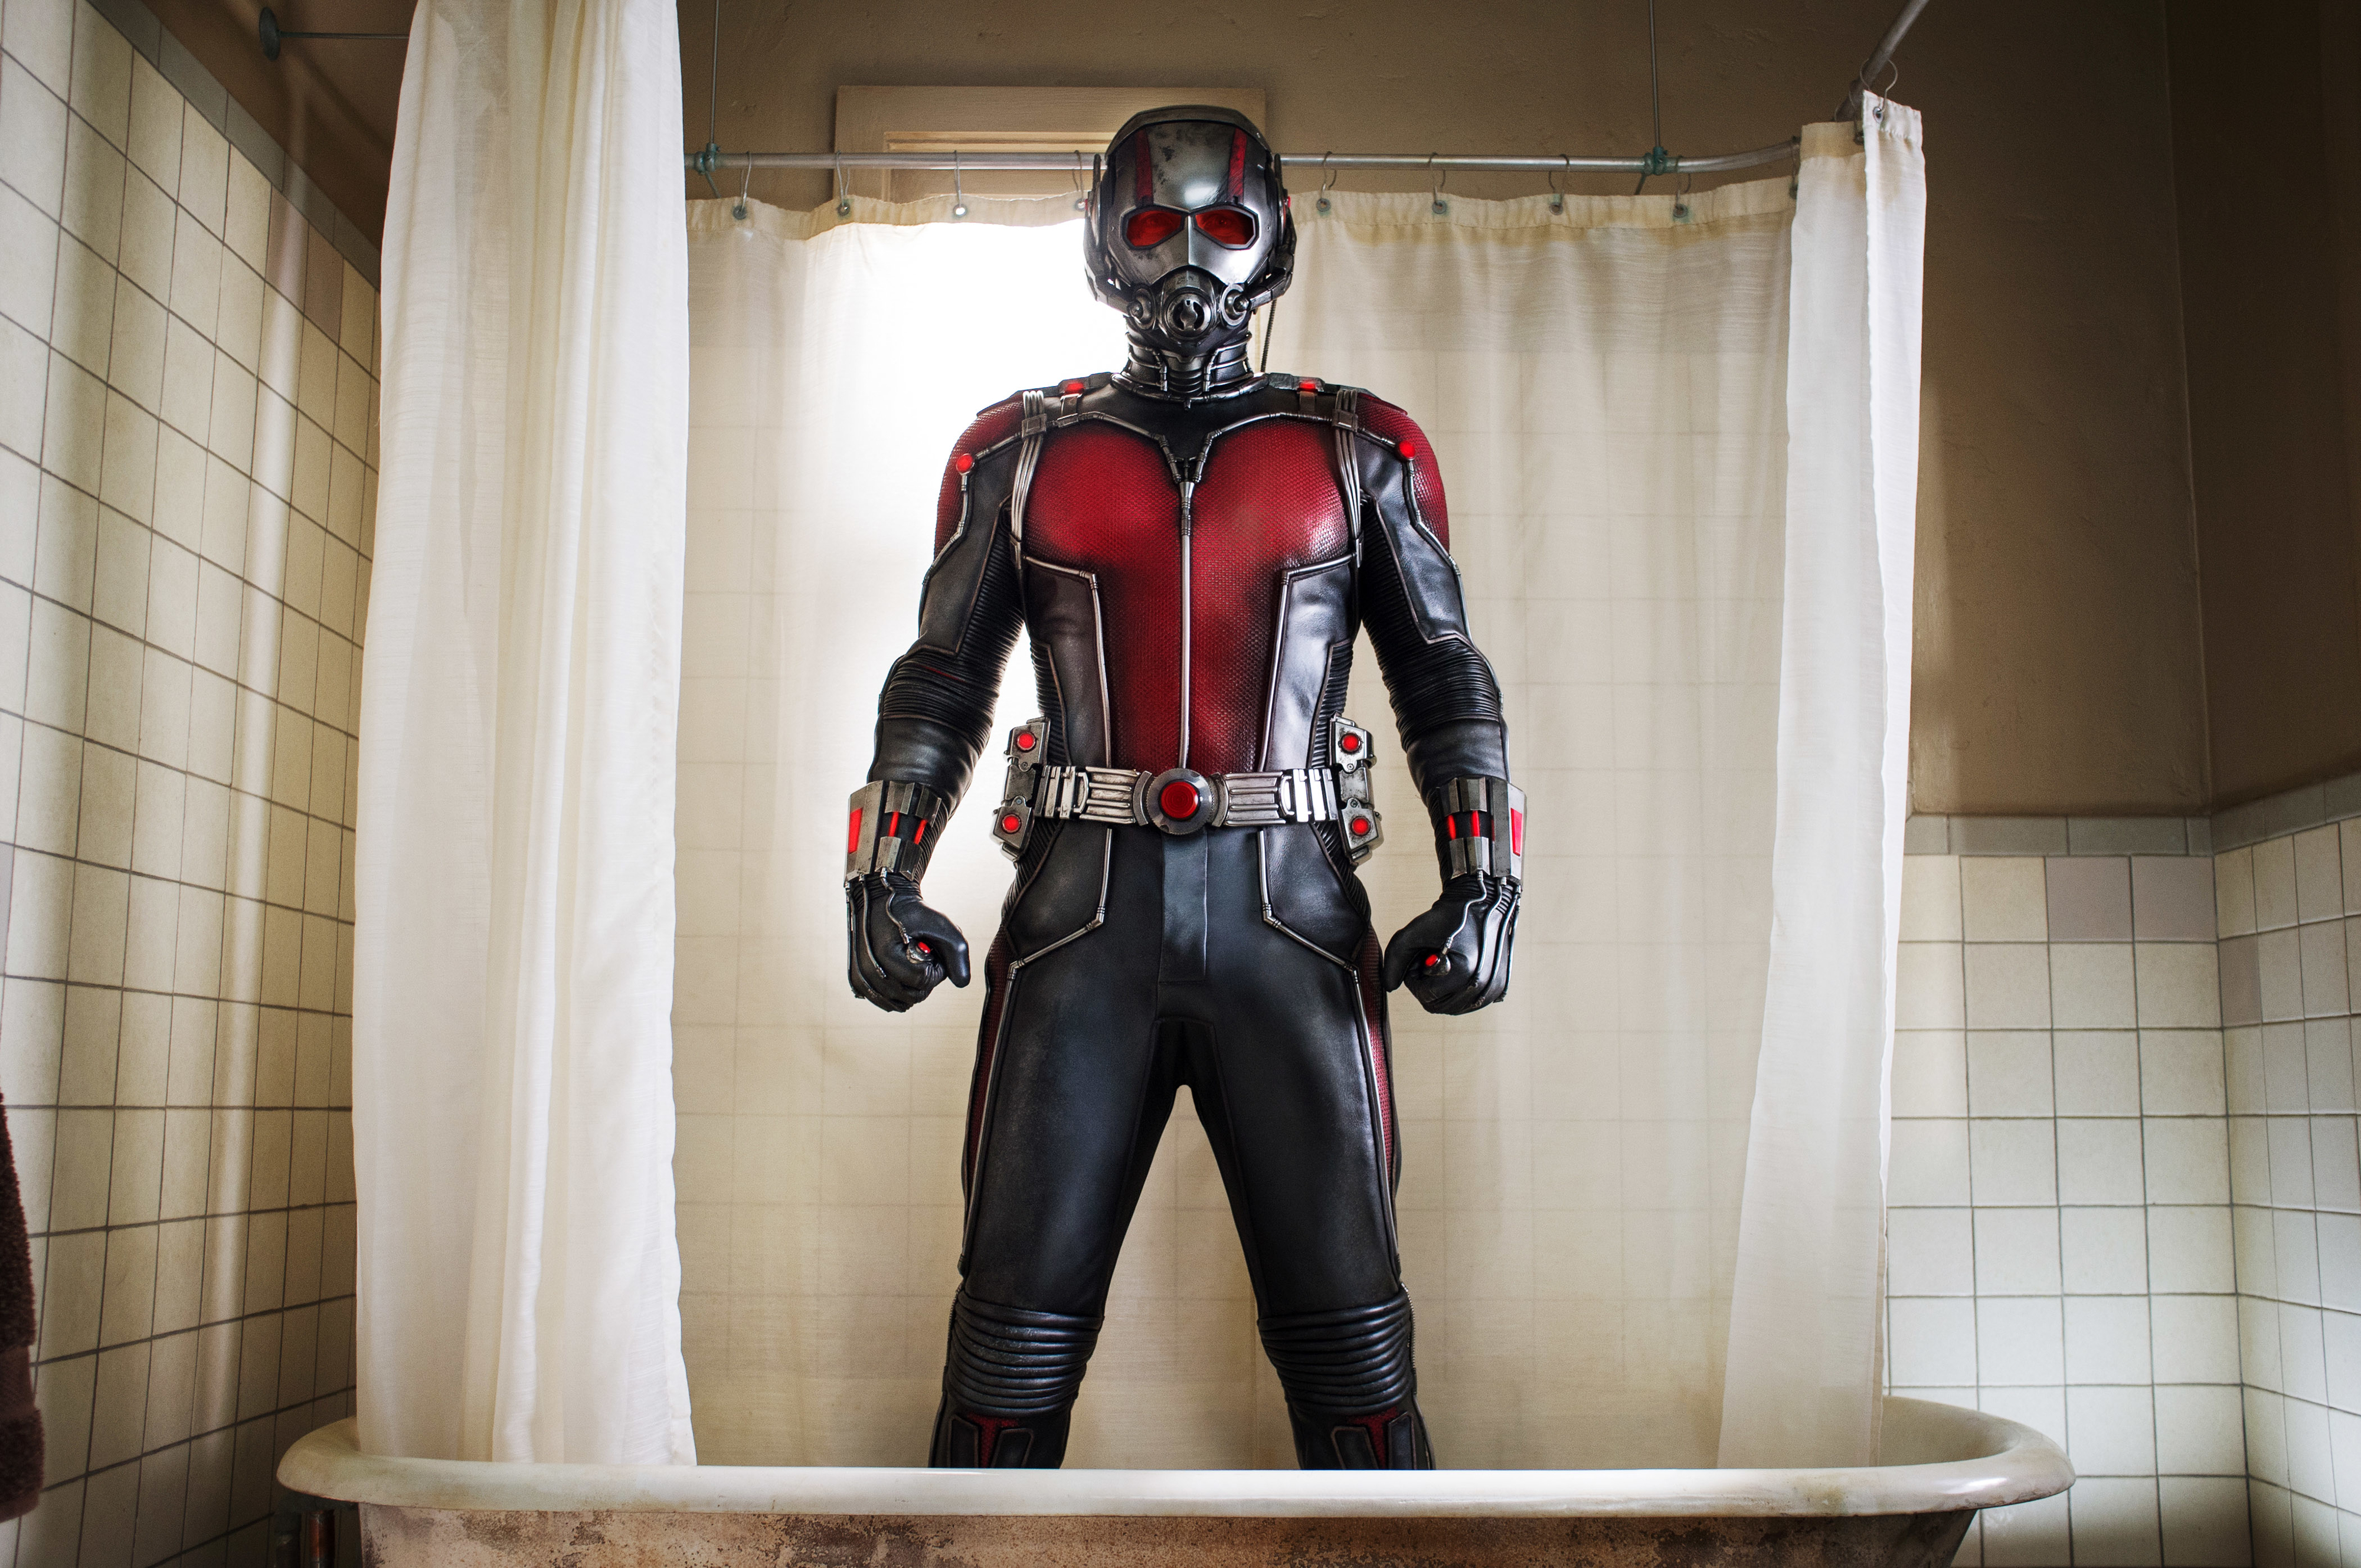 ant man standing in a tub